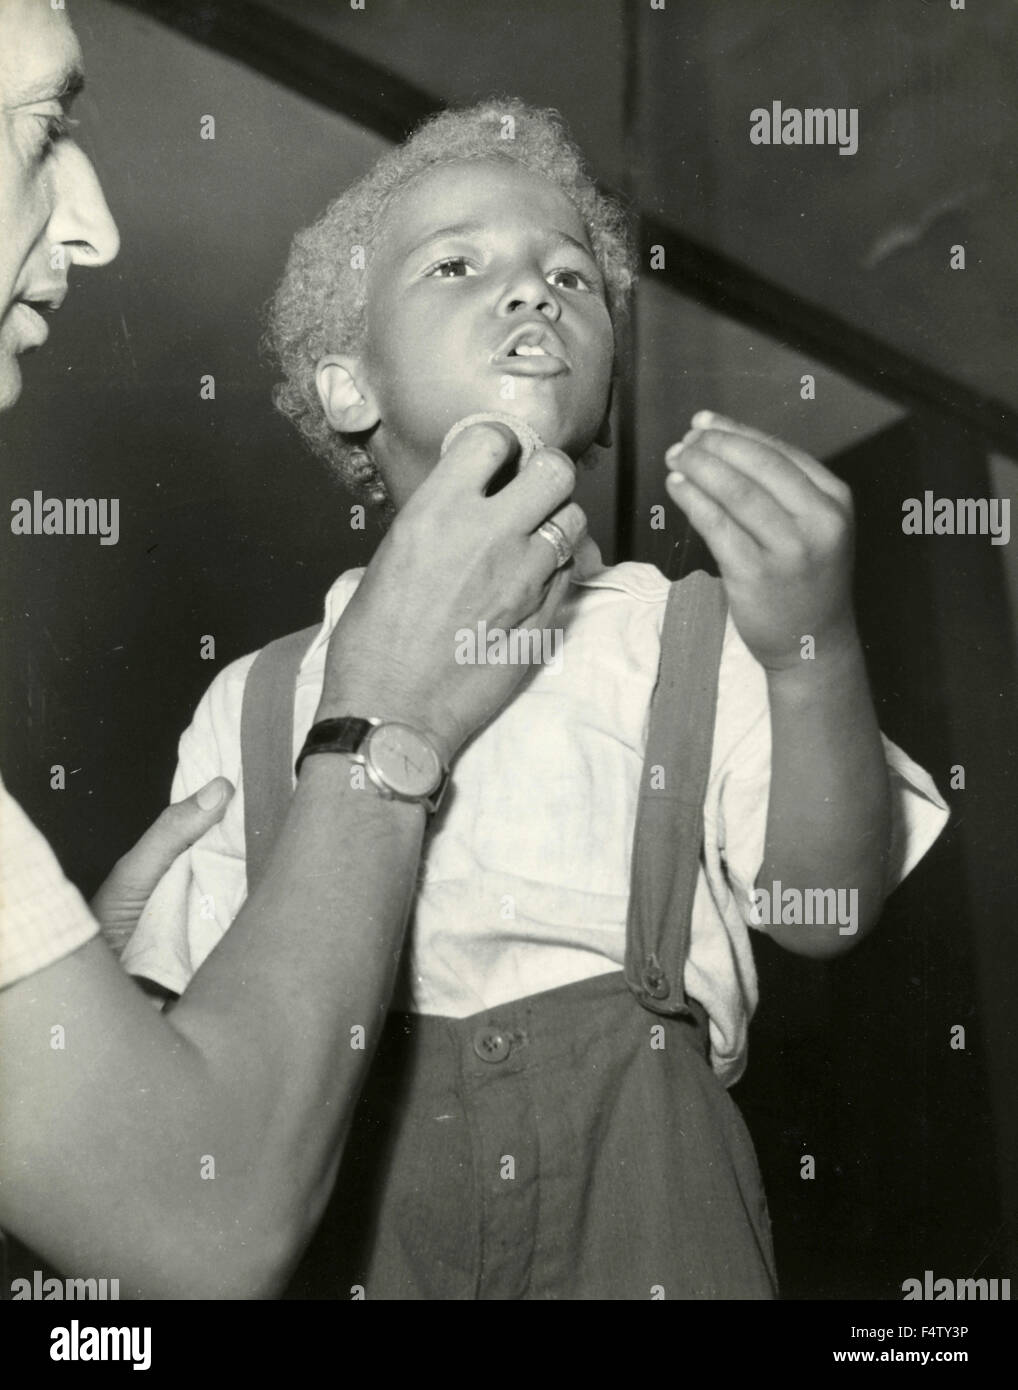 The Child Actor Angelo Maggio In The Makeup On The Set Of The Movie